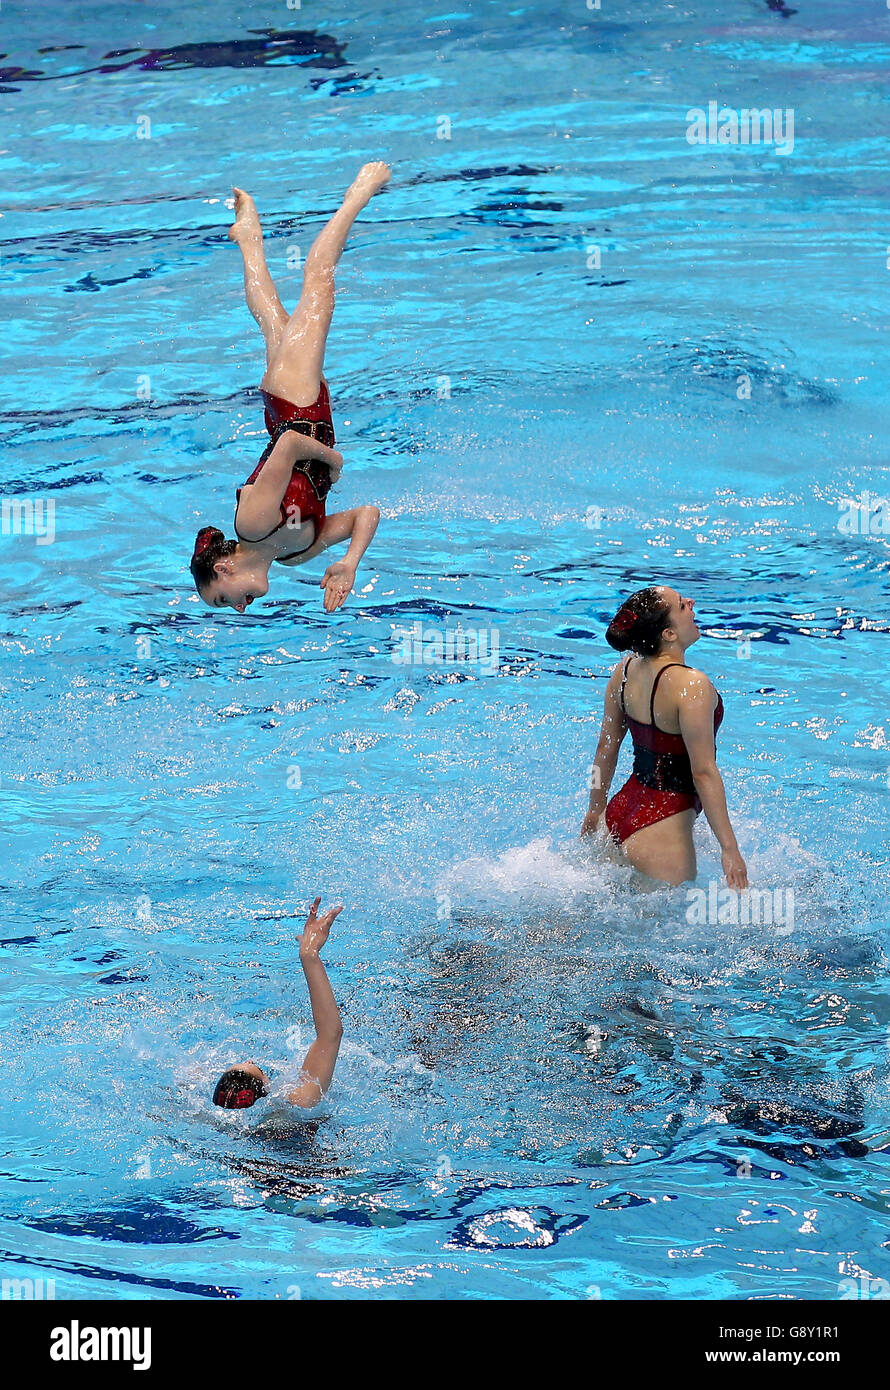 Switzerland competes in the Synchronised Swimming Free Combination Final during day four of the European Aquatics Championships at the London Aquatics Centre in Stratford. PRESS ASSOCIATION Photo. Picture date: Thursday May 12, 2016. See PA story DIVING London. Photo credit should read: John Walton/PA Wire. Stock Photo